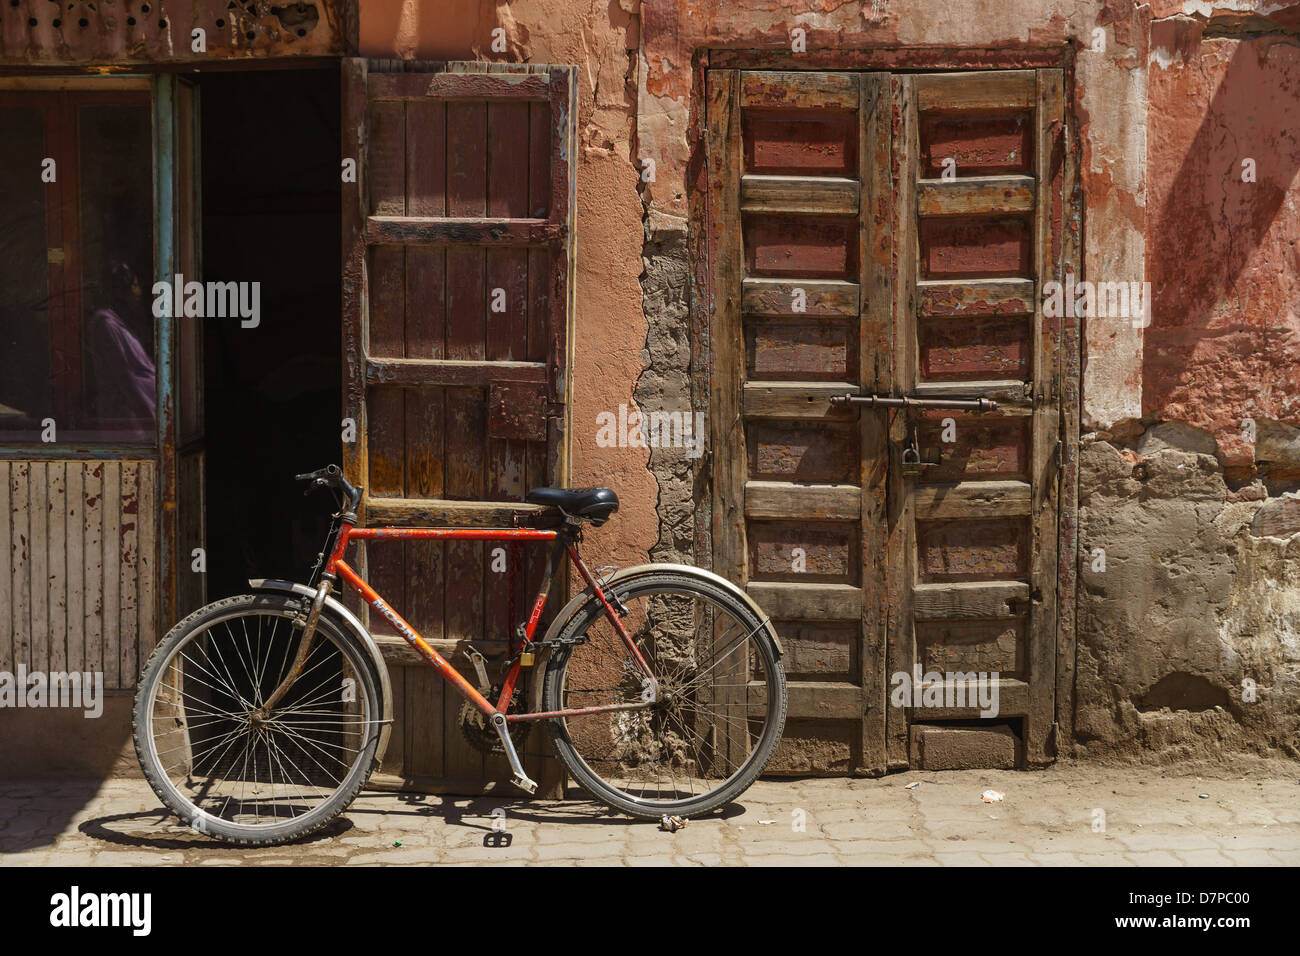 Marrakesh in the Kessabine Souk. Bicycle and old shop with wooden doors. Stock Photo